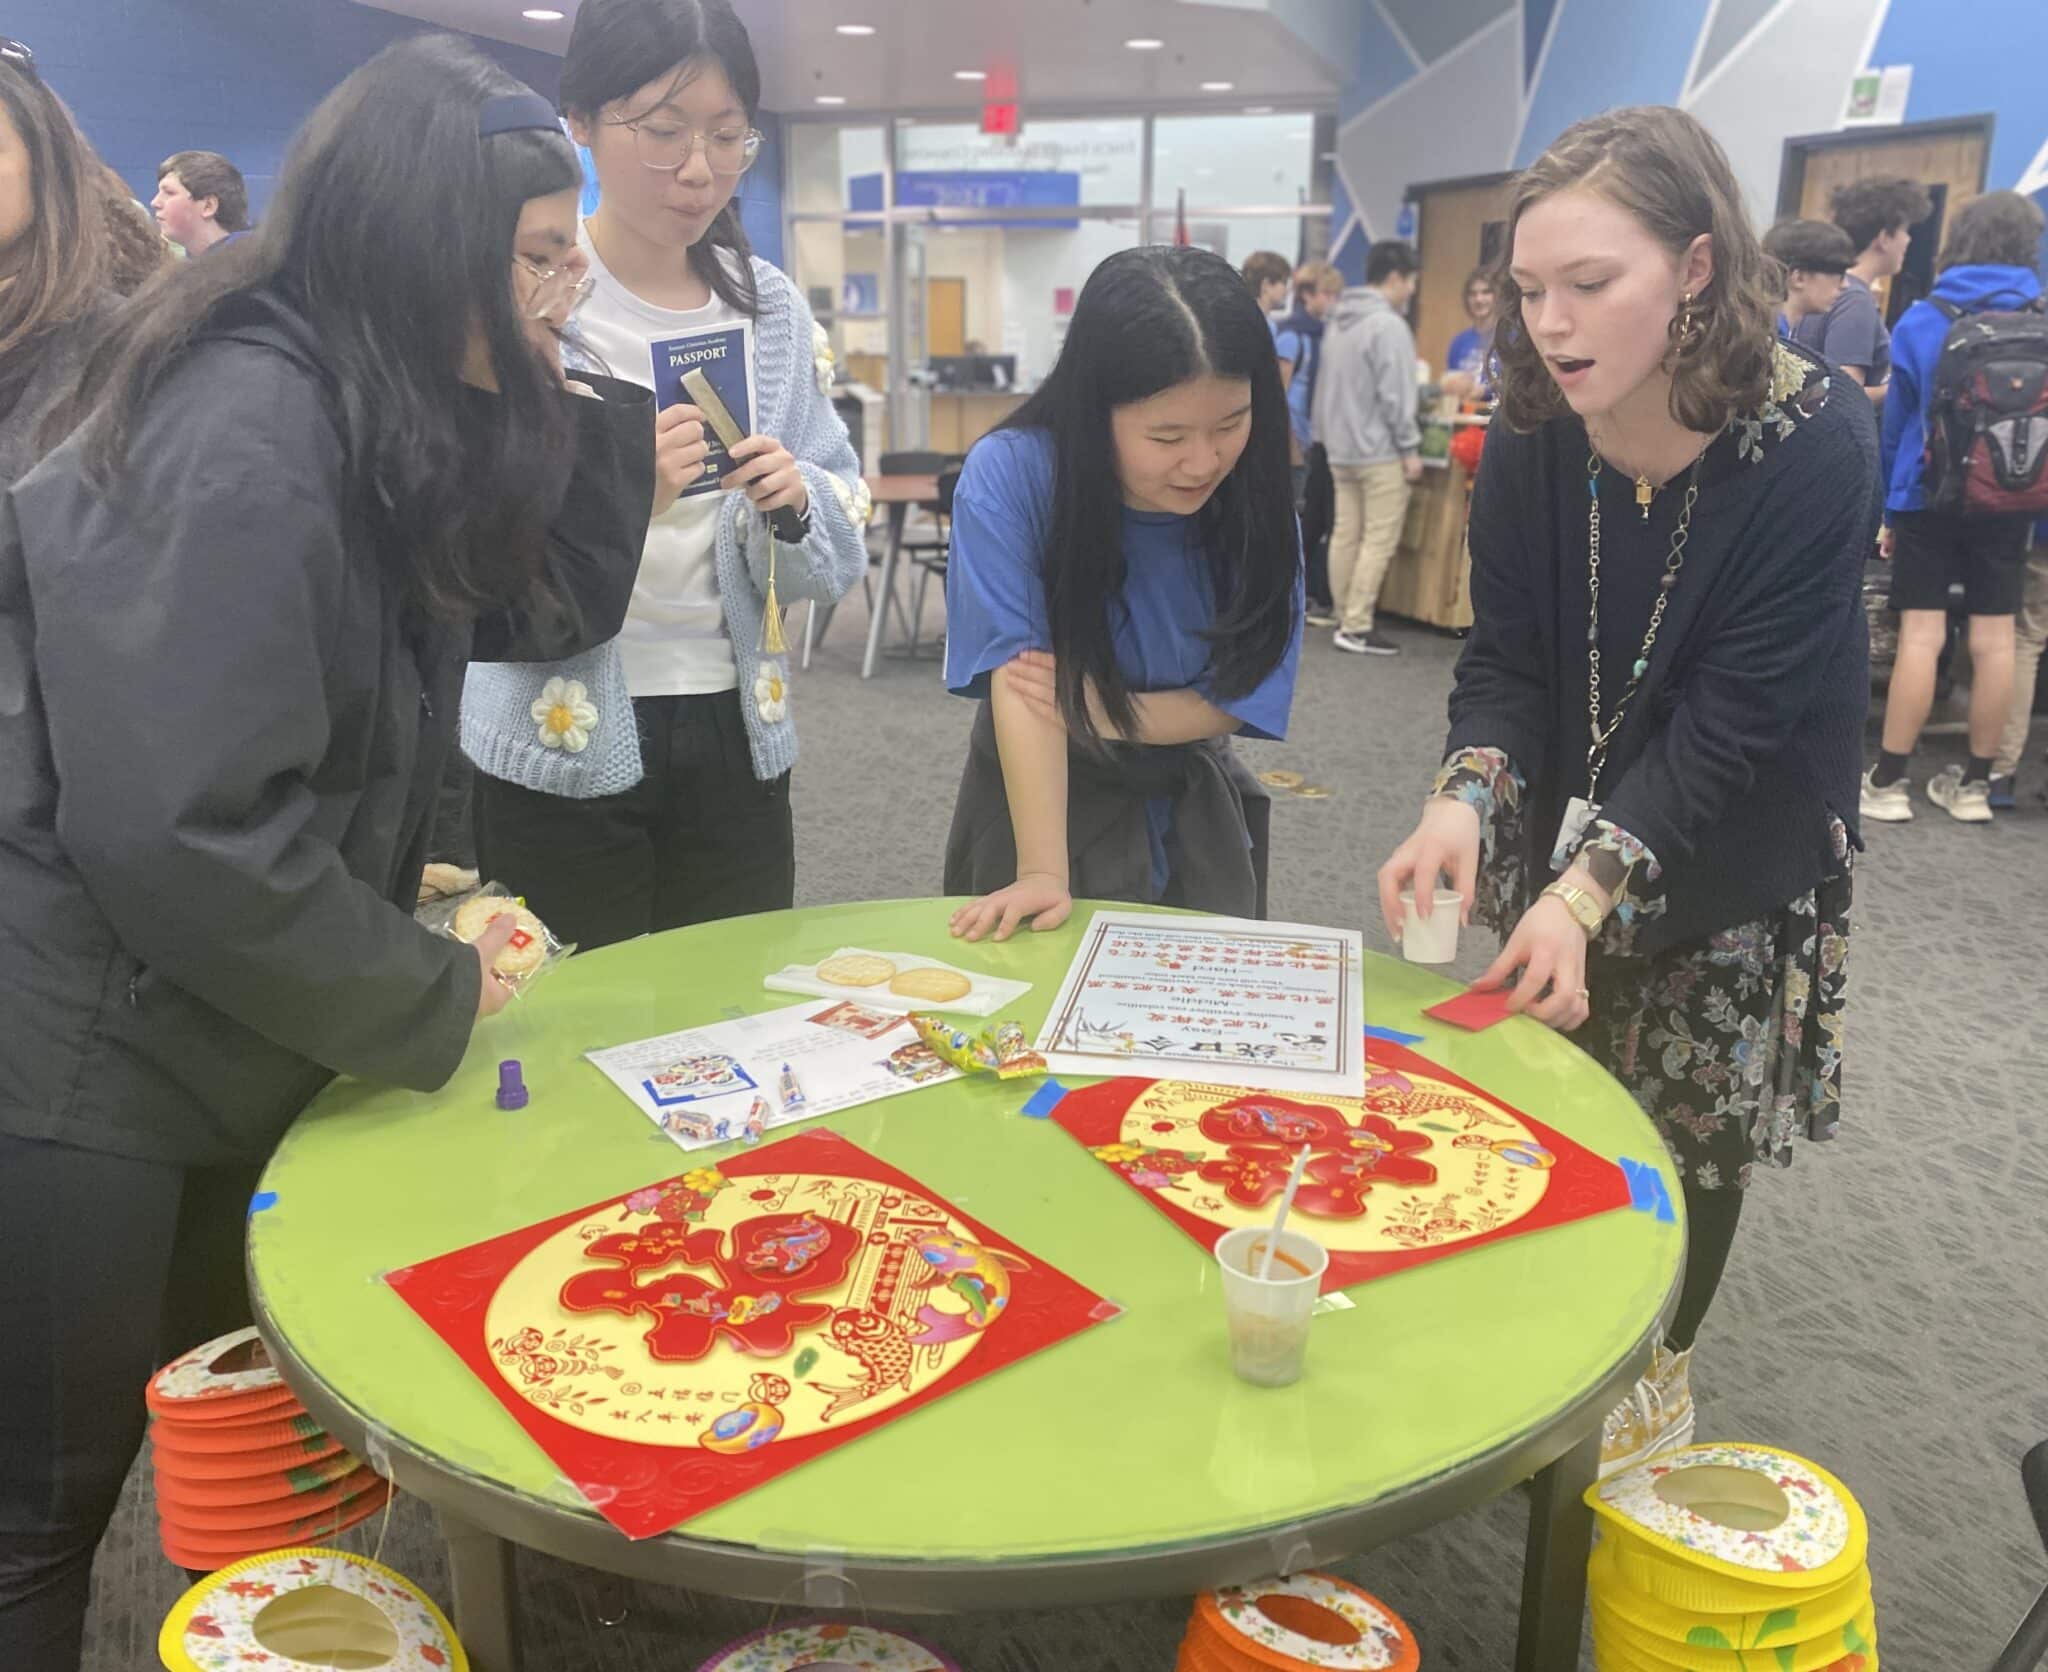 SCA international students help participants learn about their culture through a Chinese tongue twister. (L-R) Christine Xiong, Amber Zhang, and Emma Bao teach Secondary English teacher Abigail Stolberg a challenging Chinese tongue twister at the SCA International Experience.